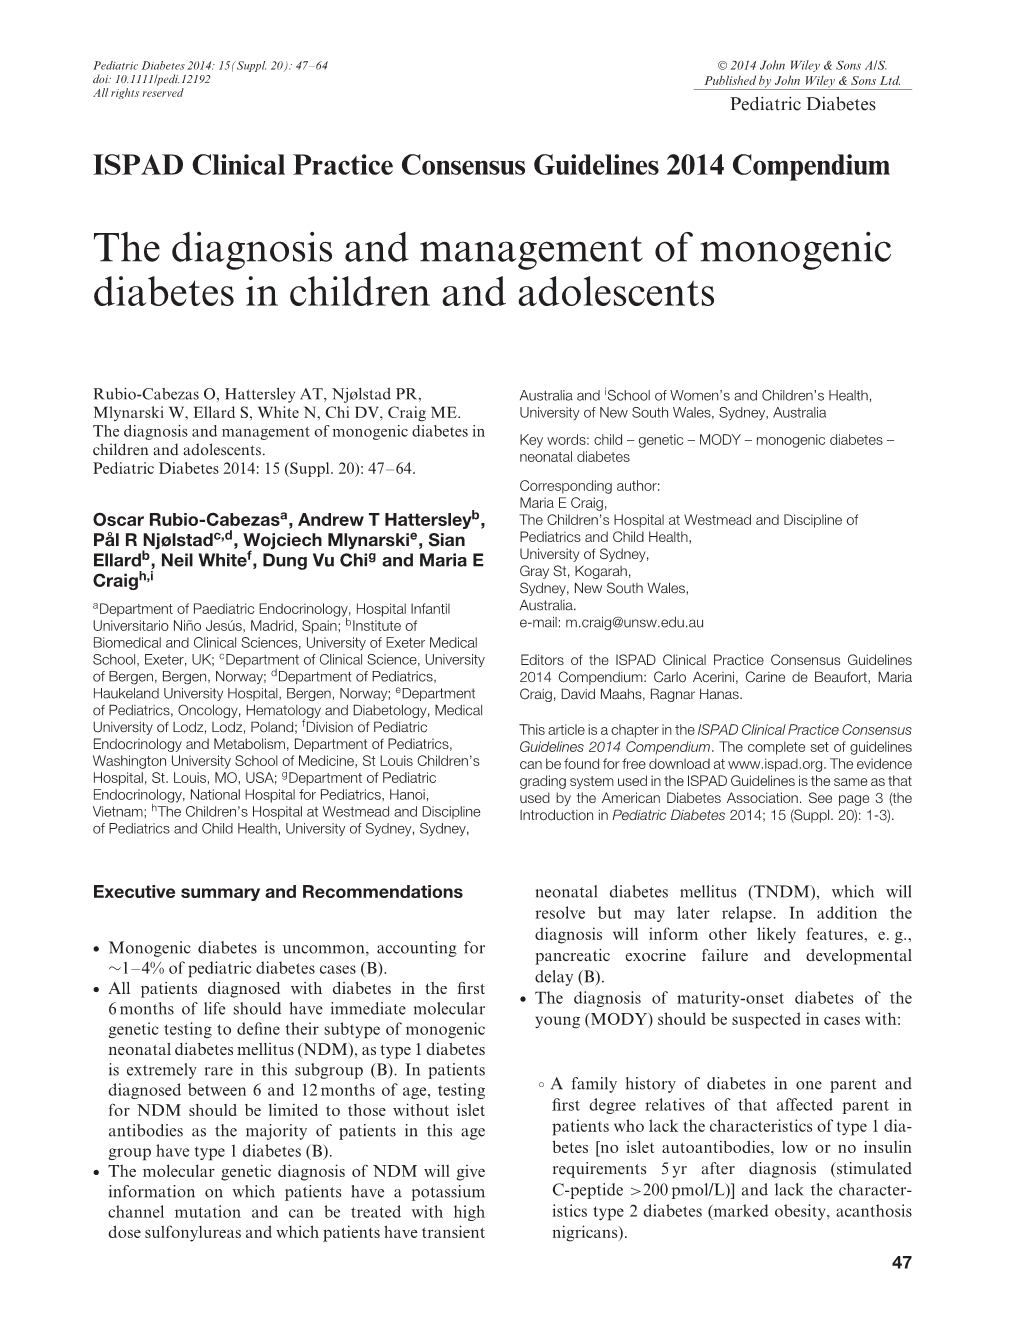 The Diagnosis and Management of Monogenic Diabetes in Children and Adolescents